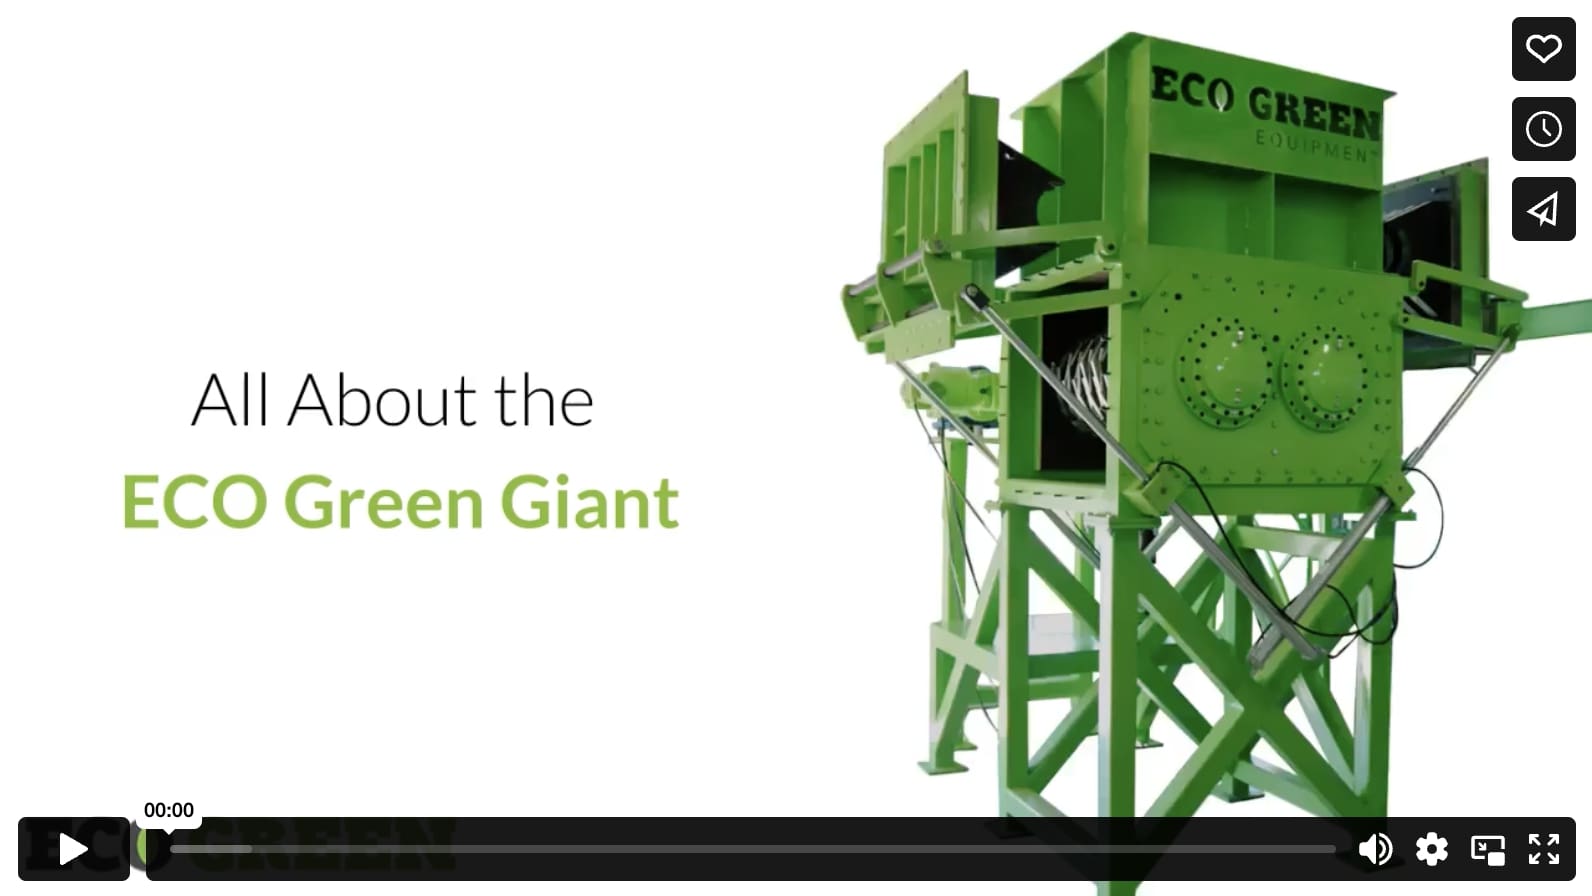 All About the ECO Green Giant